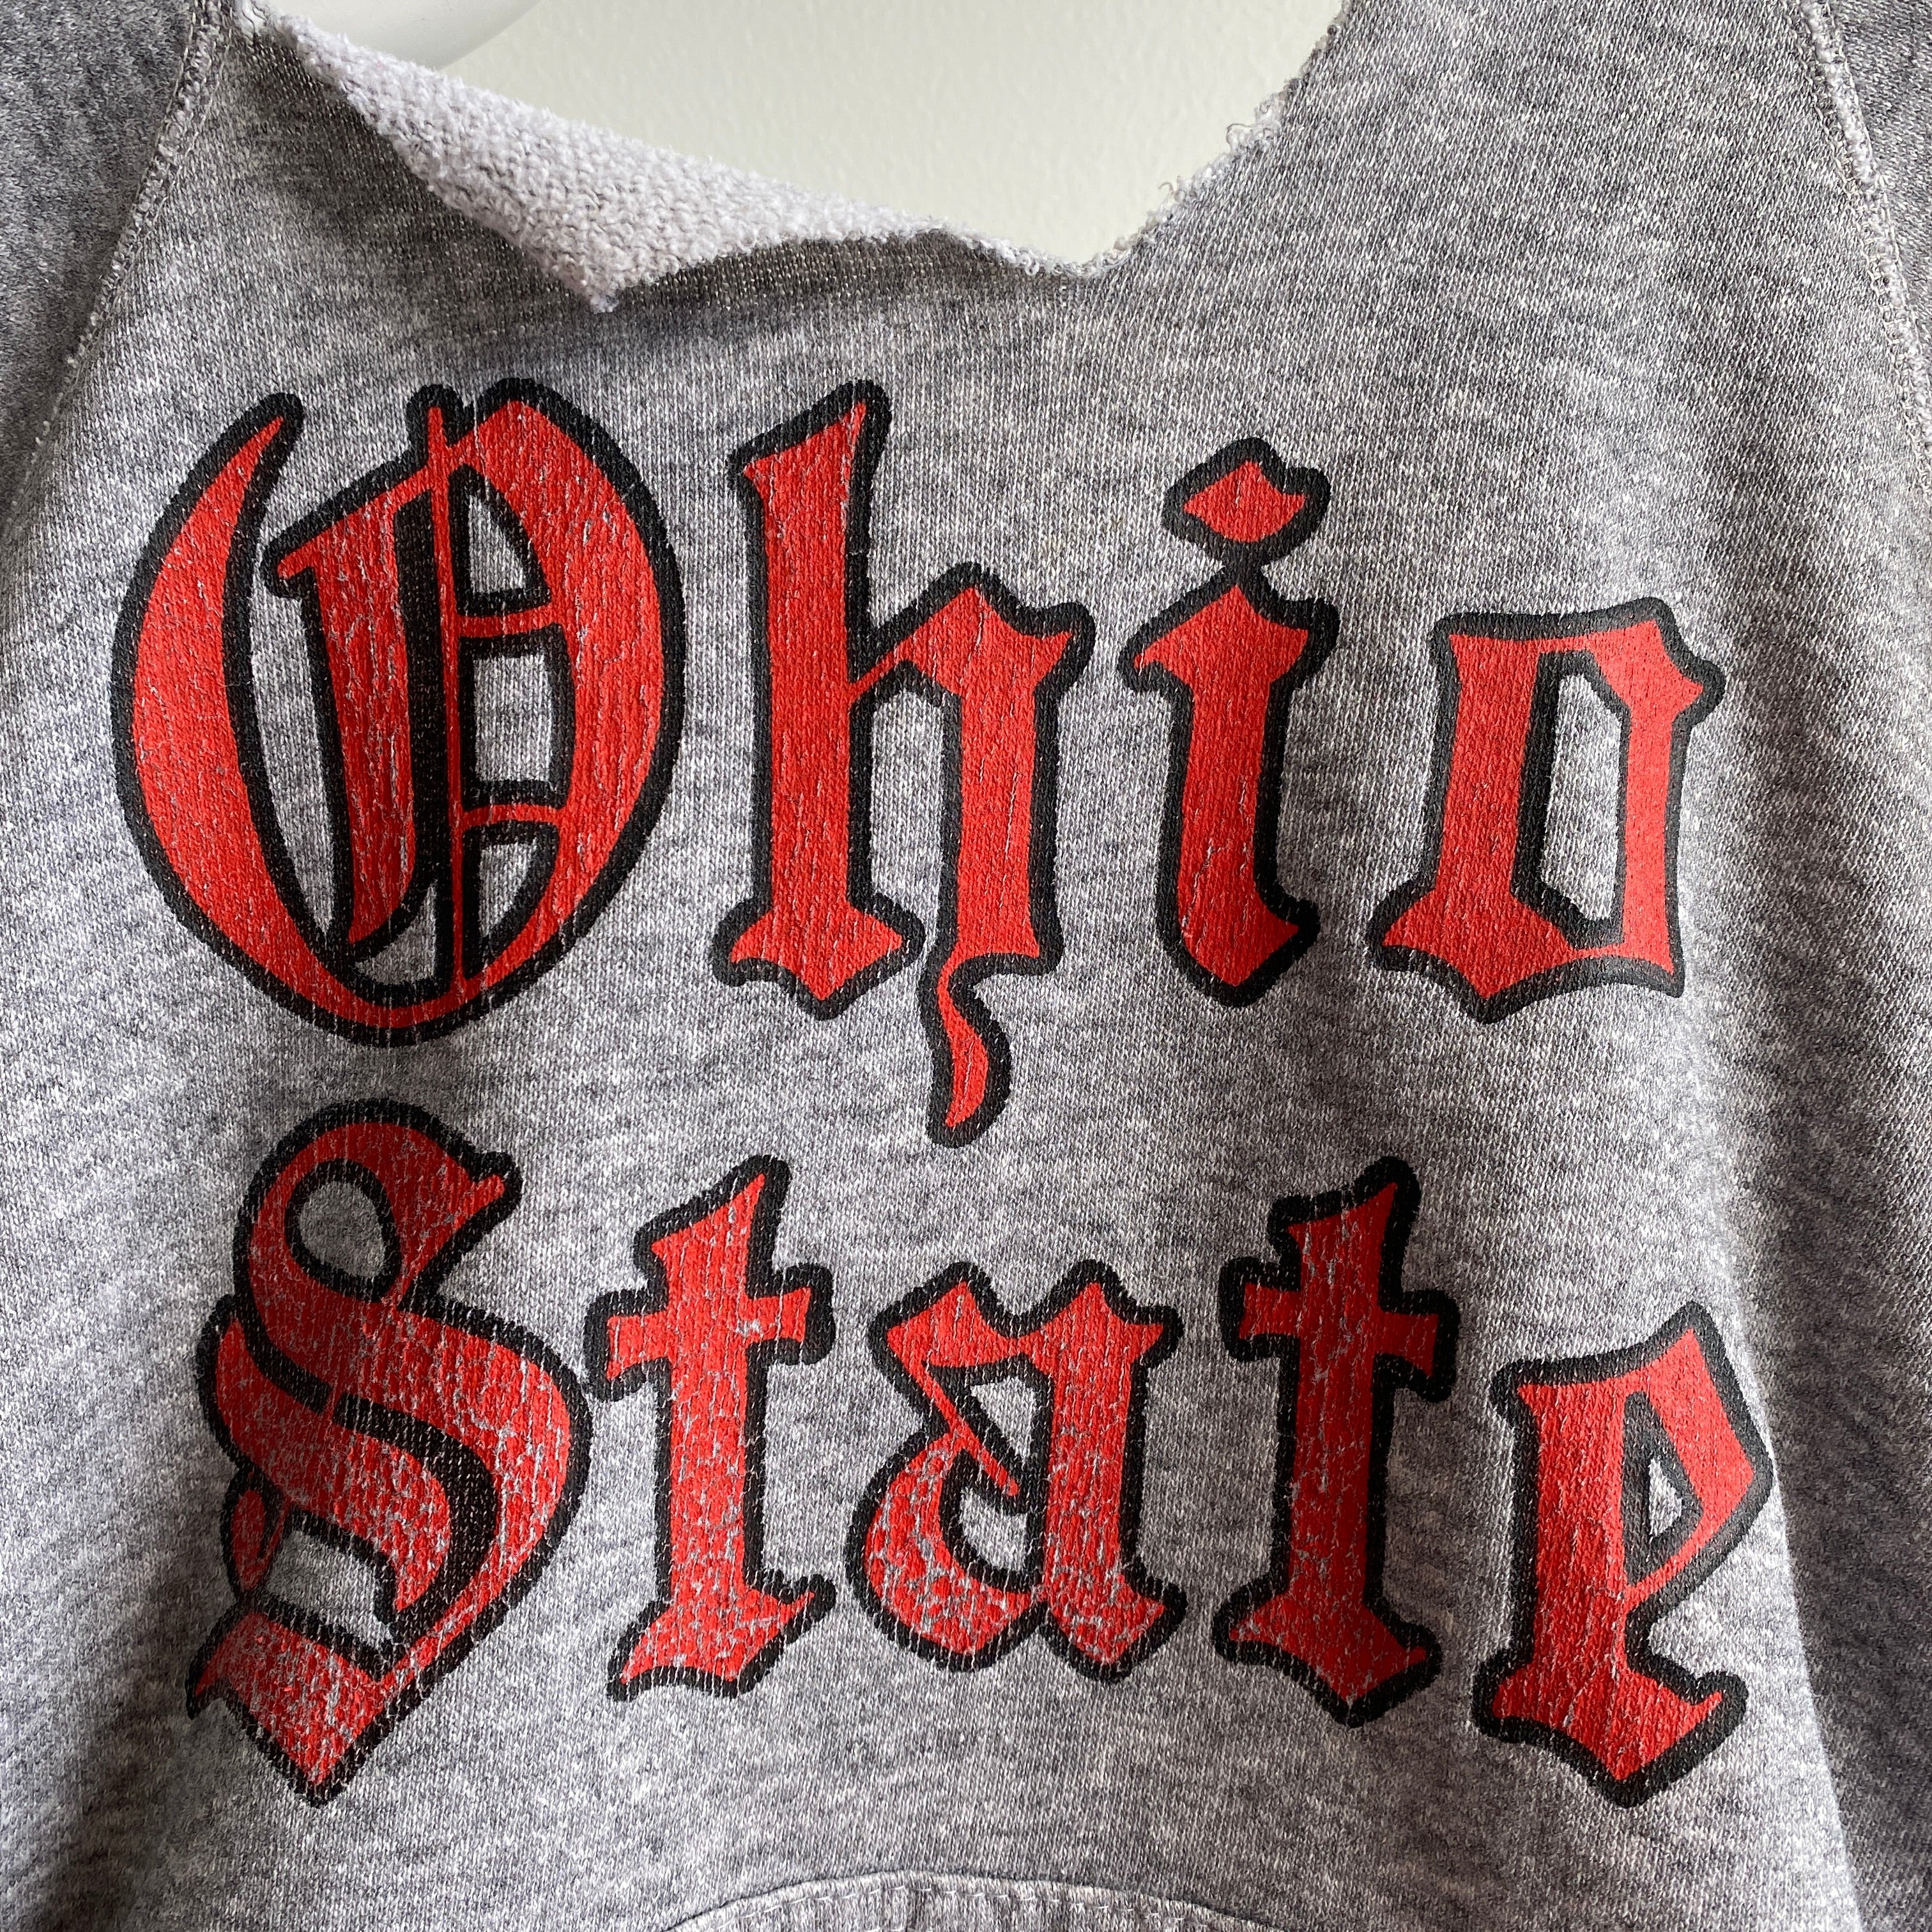 1980s Discus Brand Ohio State Smaller Sized Pullover Cut Neck Hoodie with a Torn Pouch